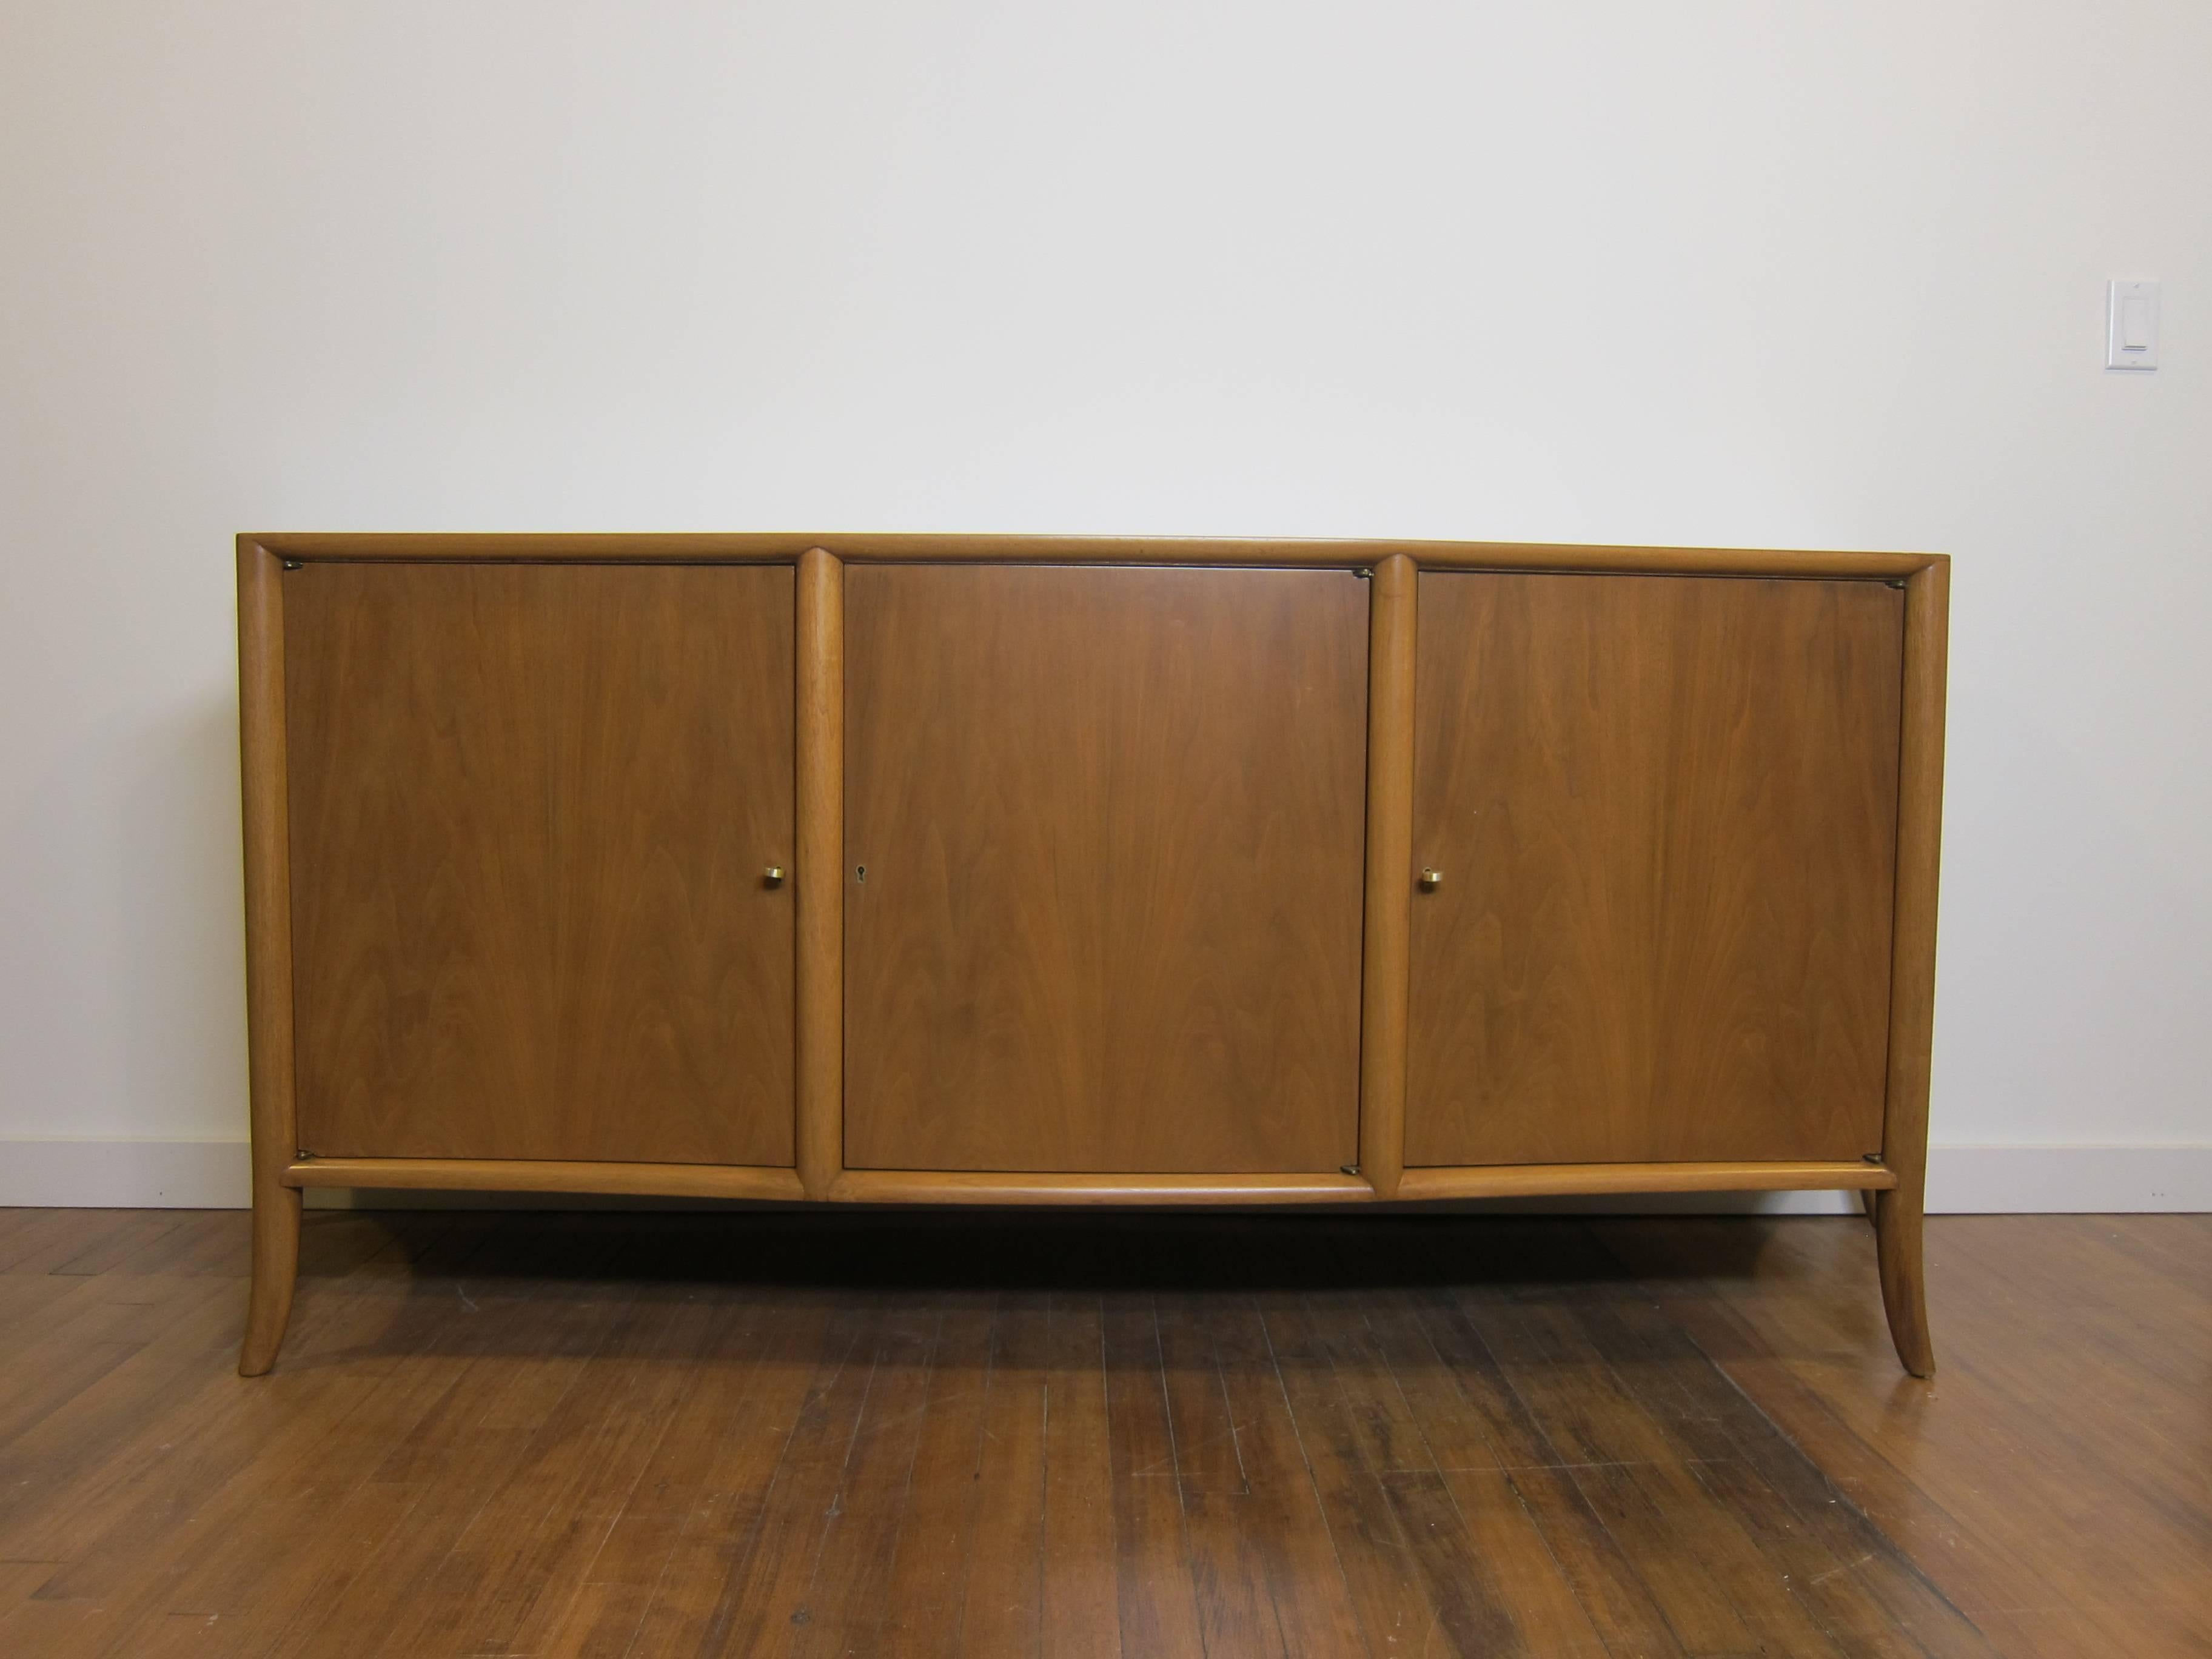 An elegant Saber leg sideboard designed by T.H. Robsjohn-Gibbings for Widdicomb.  T.H. Robsjohn Gibbings Credenza mid century.  Bleached mahogany with bowed front and tapered sides. Inside four drawers with shelving, maintains two original keys.